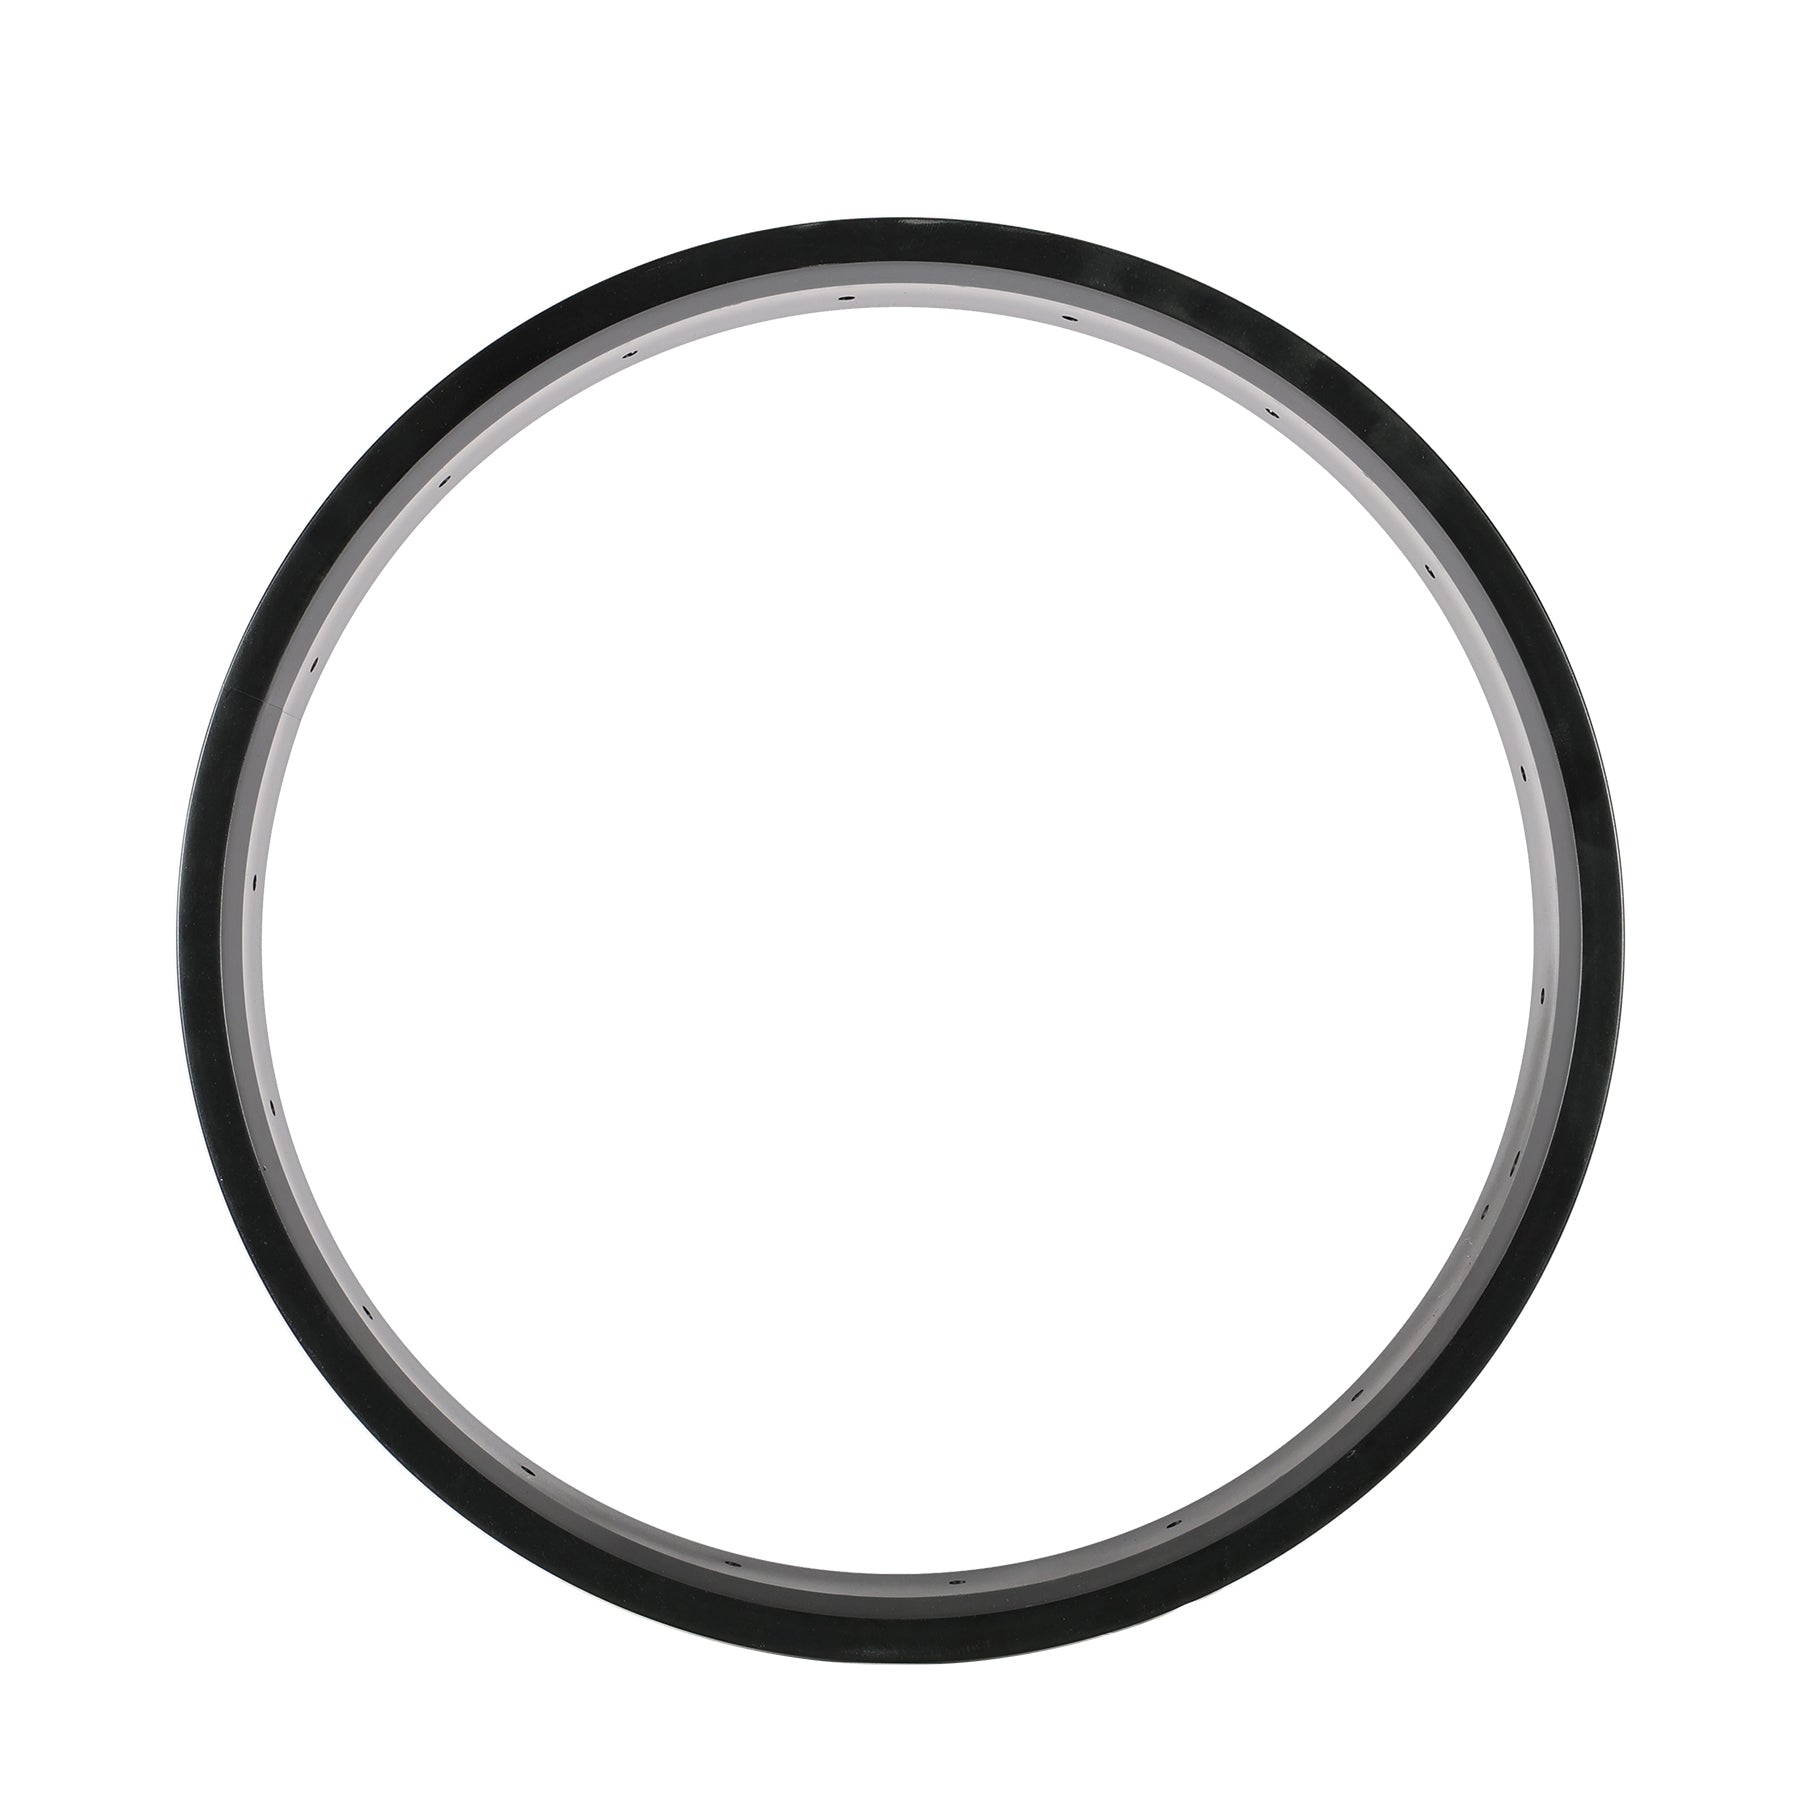 Tracer RM-TR752036 Bicycle Fat Rim 20" x 3" x 36H For Cruiser Bike